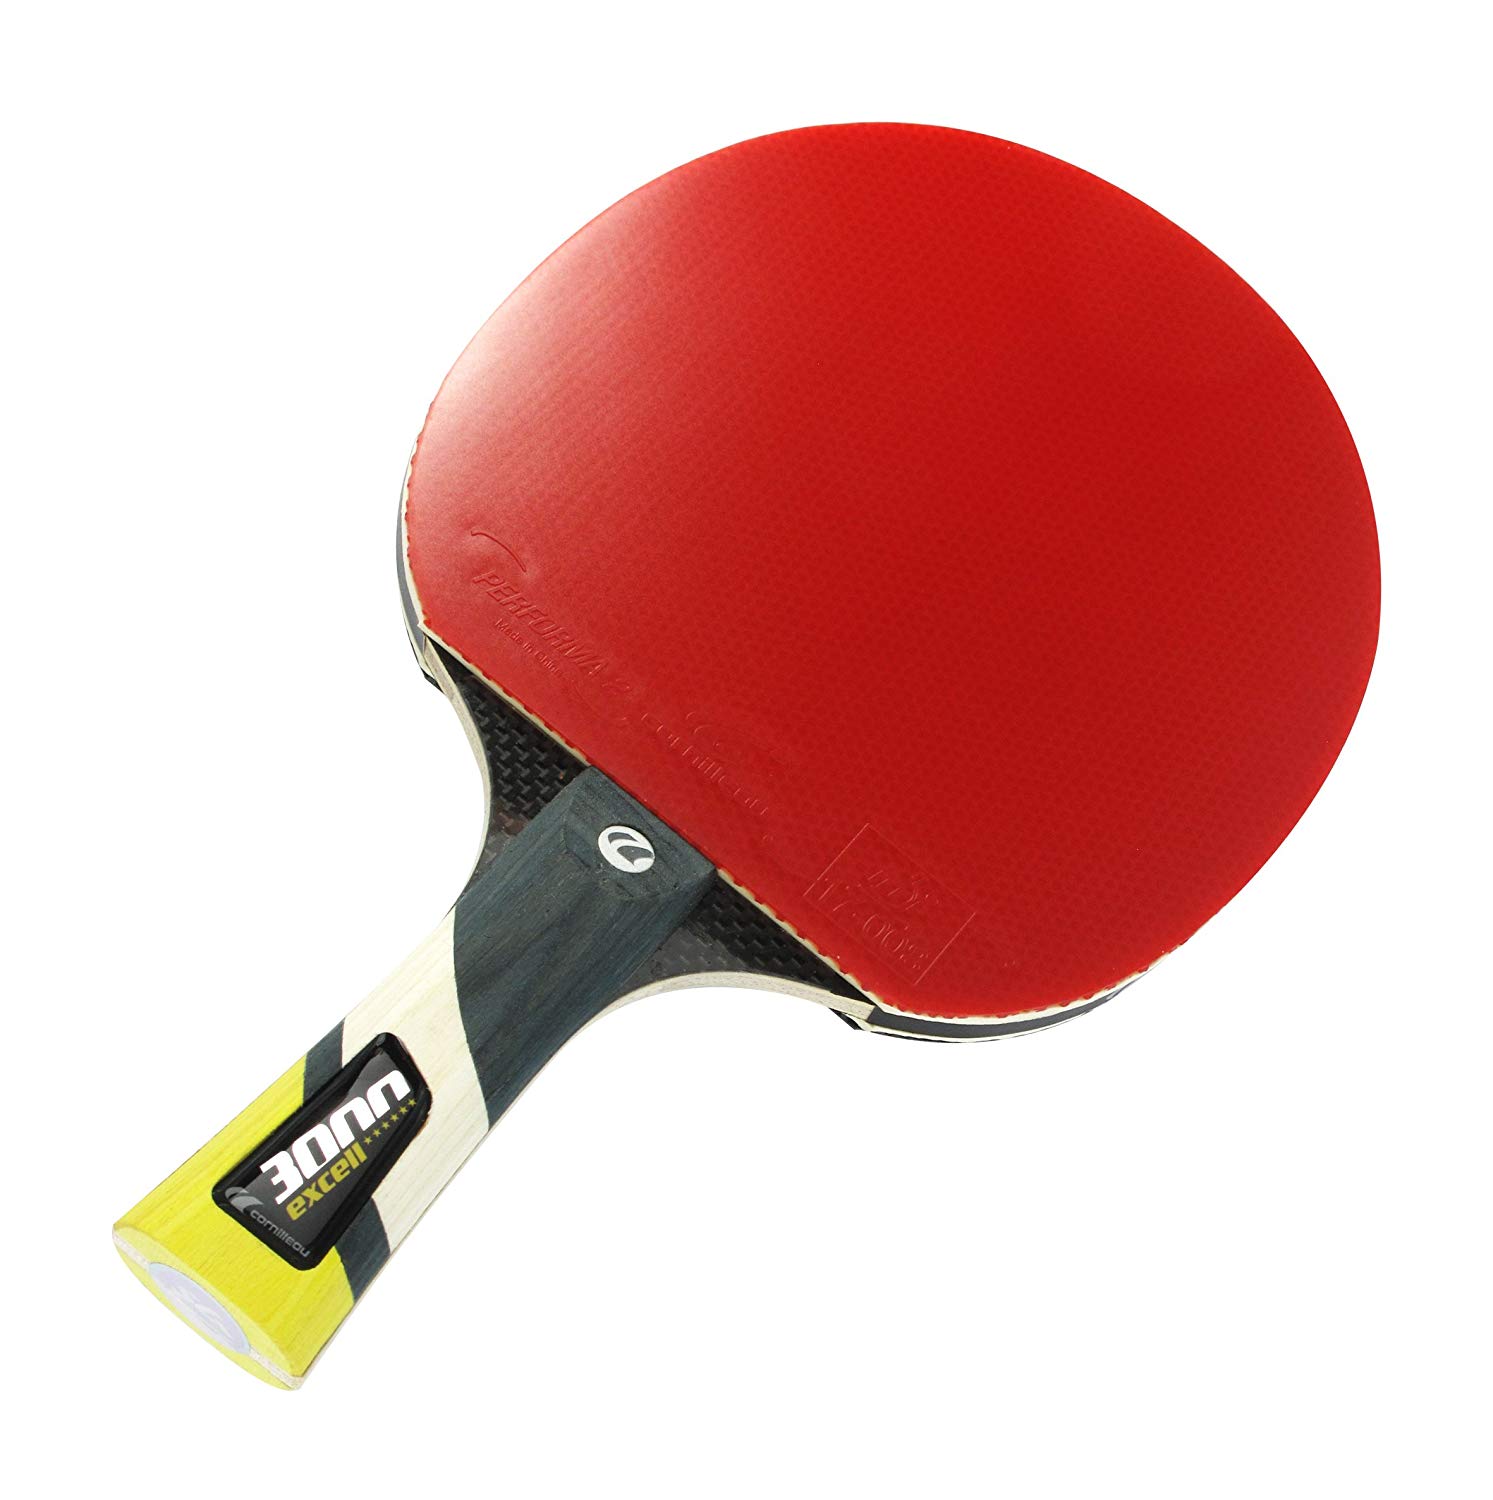 3000 Excell Carbon Ping Pong Paddle (Table Tennis Racket)